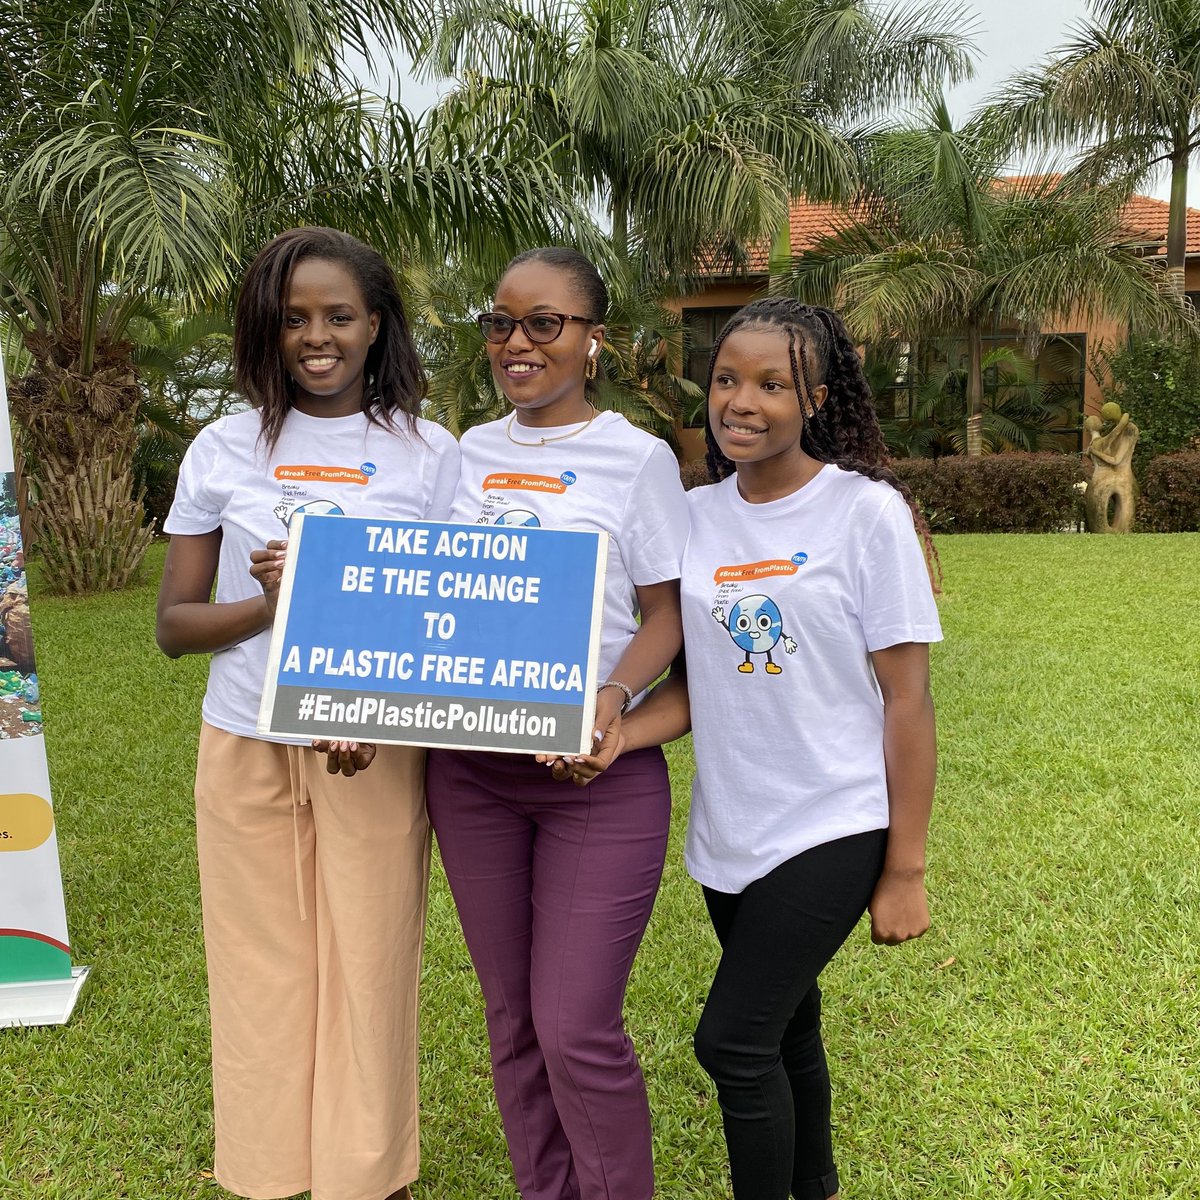 We're adding to the call to adopt a strong legally binding #PlasticsTreaty on plastic pollution.

Take action for a plastic-free future.
Take action for a plastic-free Africa.

#INC4 #JustTransition #EndPlasticPollution #BreakFreeFromPlastic 
@EndPlasticsNow @brkfreeplastic